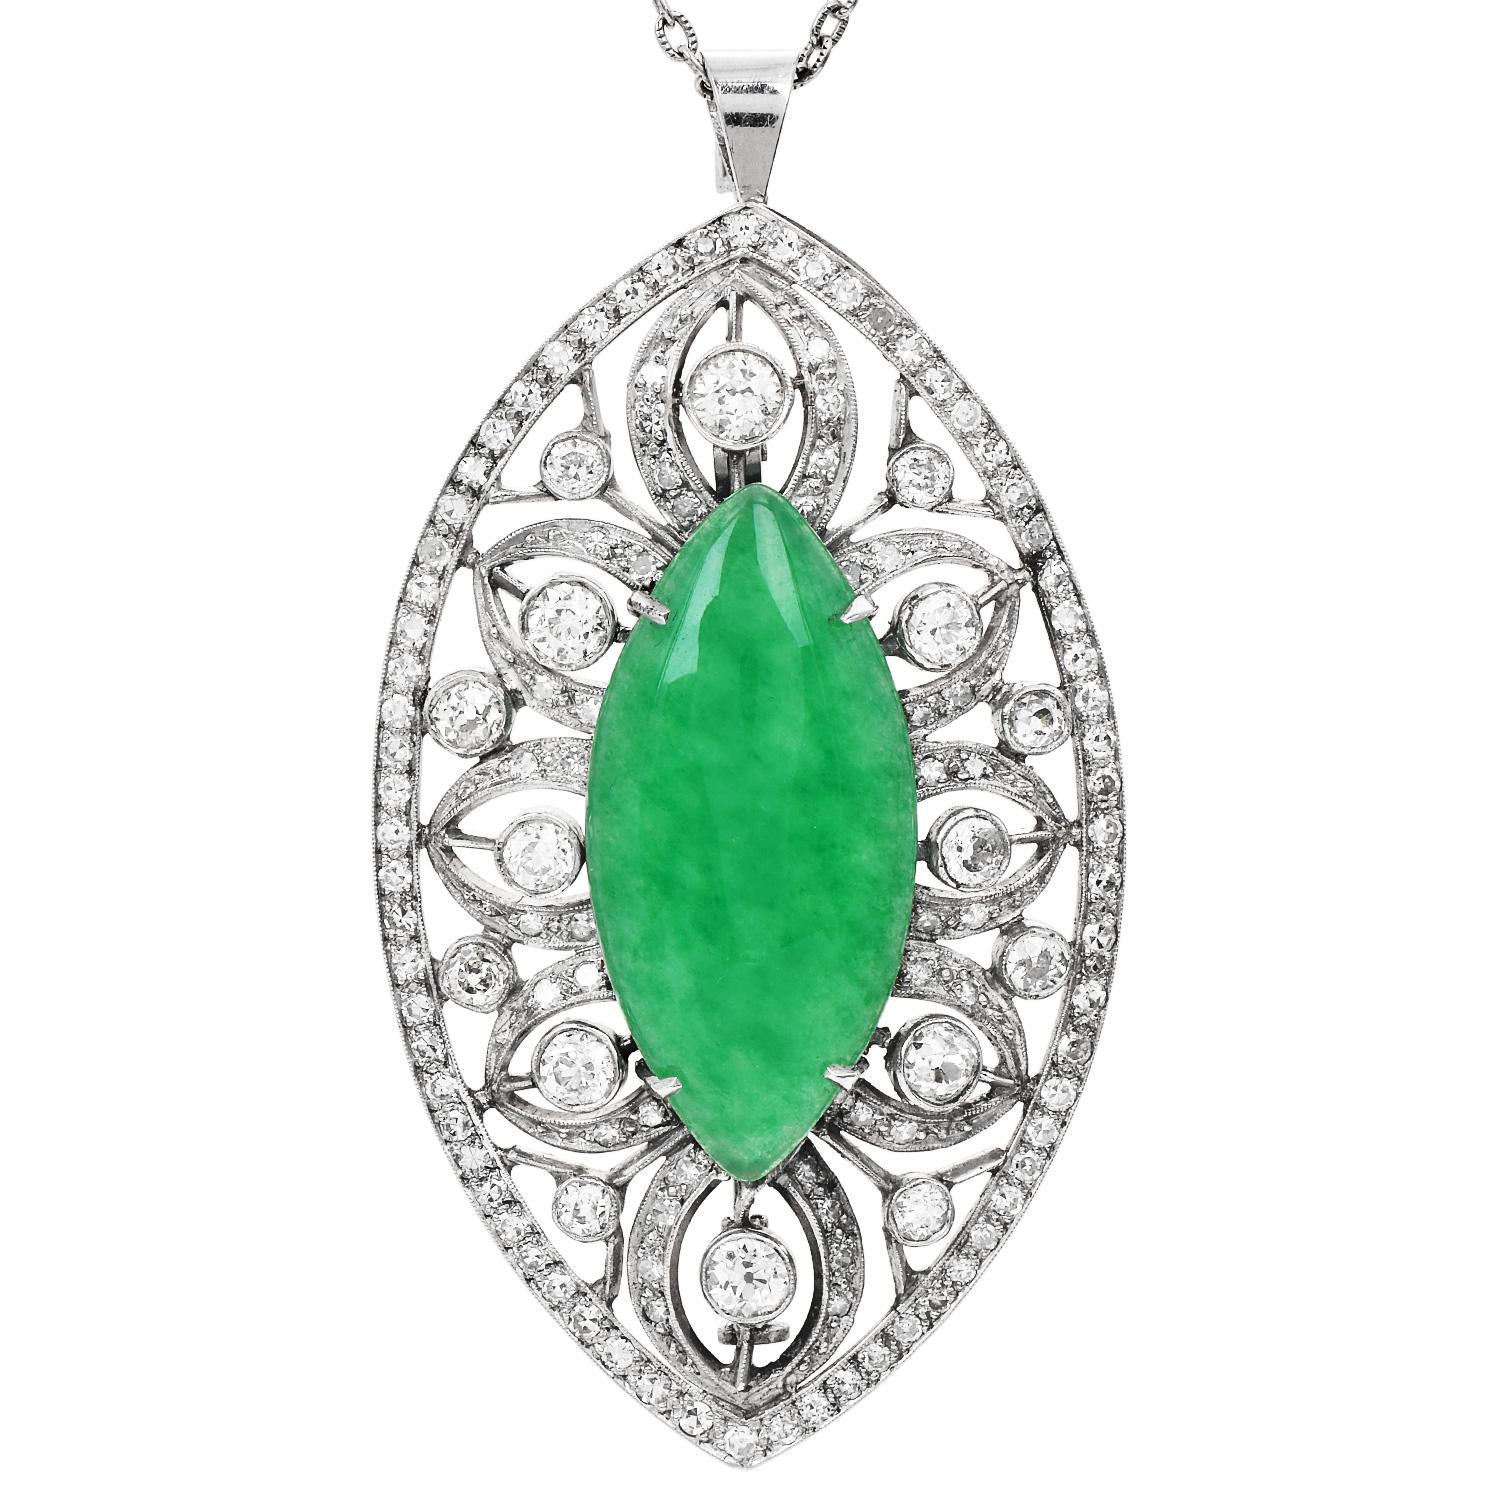 The Antique Old-mine Cut Diamond and Apple Green Jade with Platinum Floral Marquise Large Brooch Pendant is a remarkable piece of jewelry that embodies elegance and antique charm.

The Brooch features a central lush, vibrant apple green Genuine jade